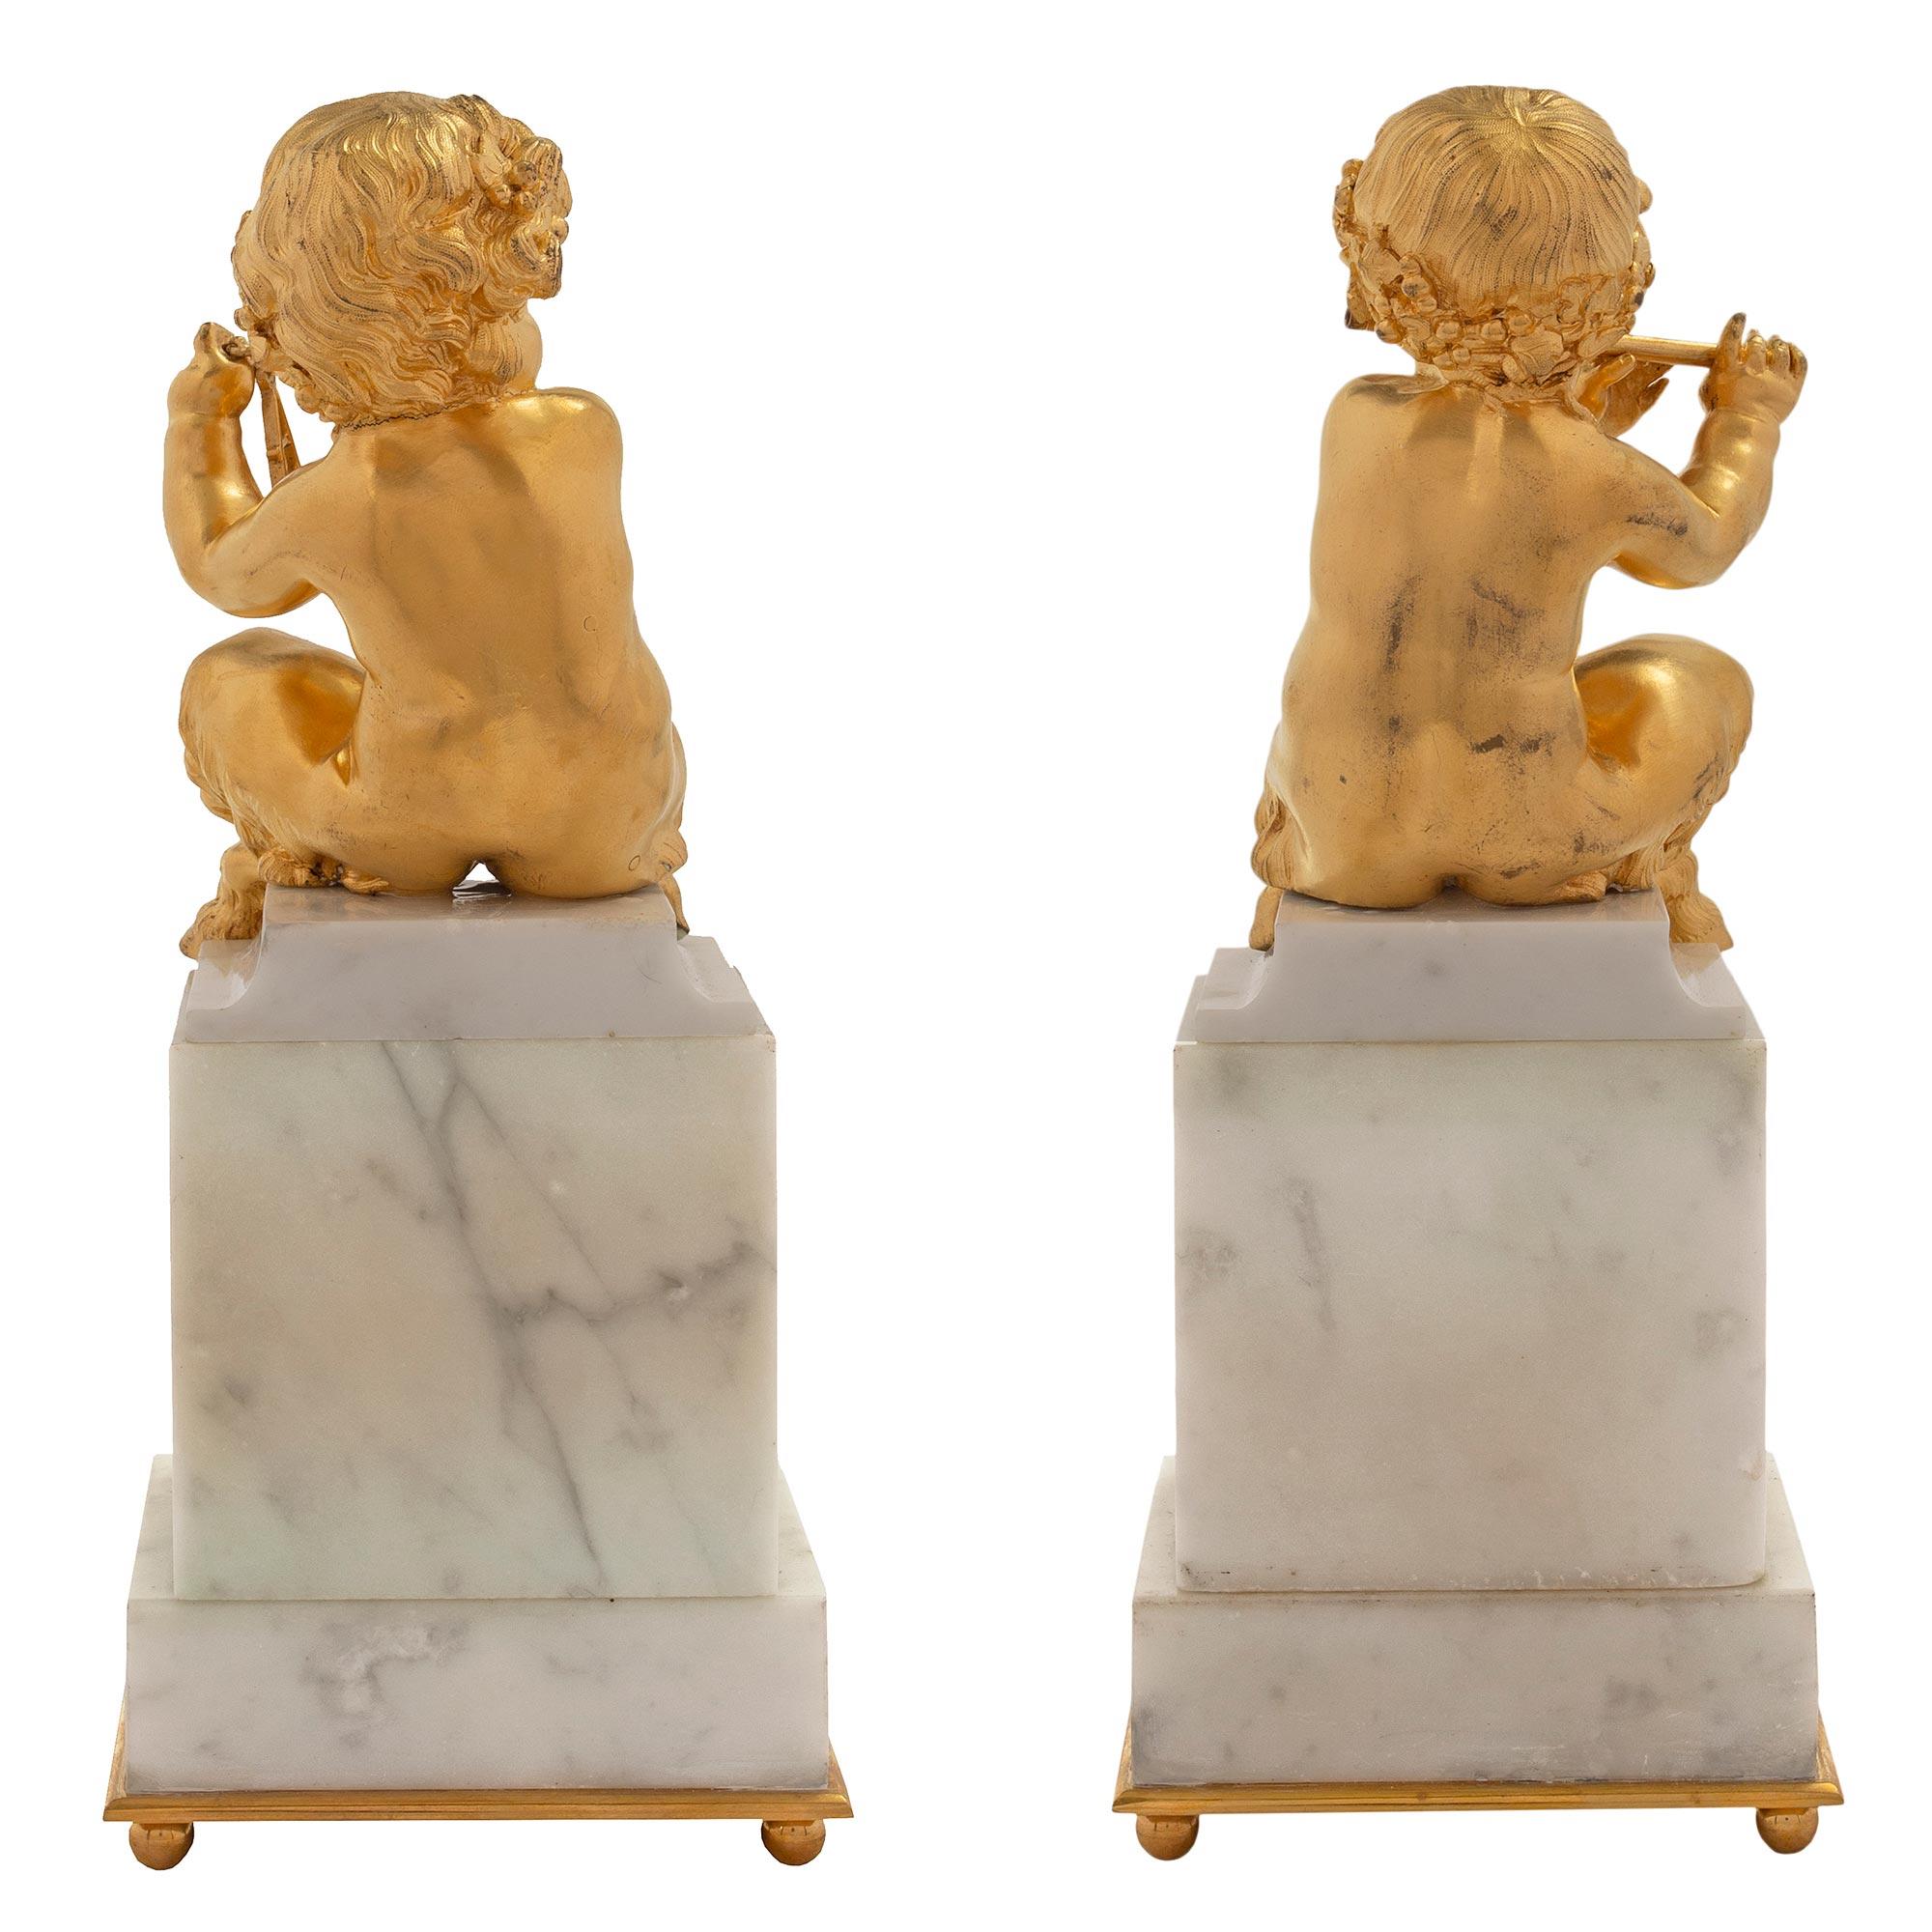 Pair of French Mid-19th Century Louis XVI Style Statues of Young Cherubs In Good Condition For Sale In West Palm Beach, FL